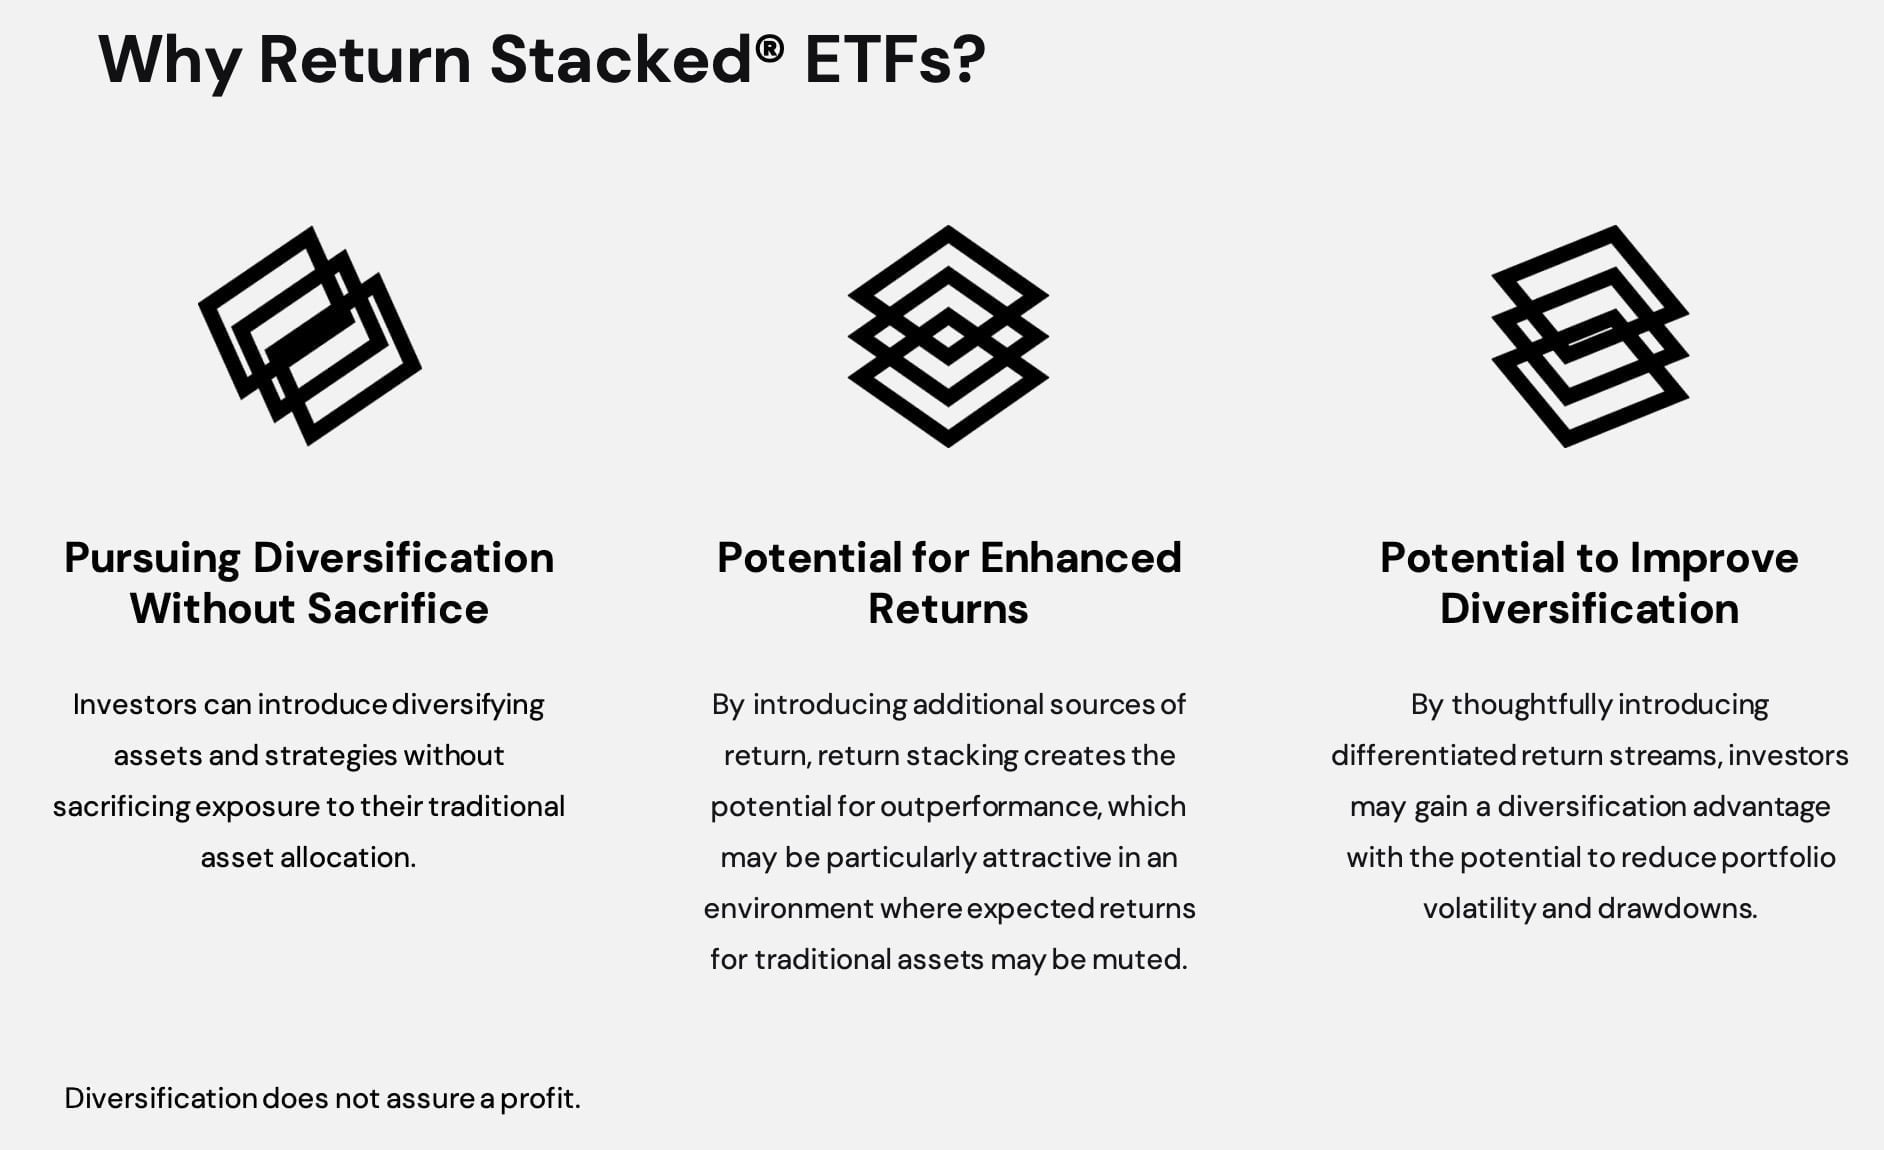 Why Return Stacked ETFS like RSSB? Pursuing Diversification With Sacrifice along with Potential for Enhanced Returns and Potential for Improved Diversification 